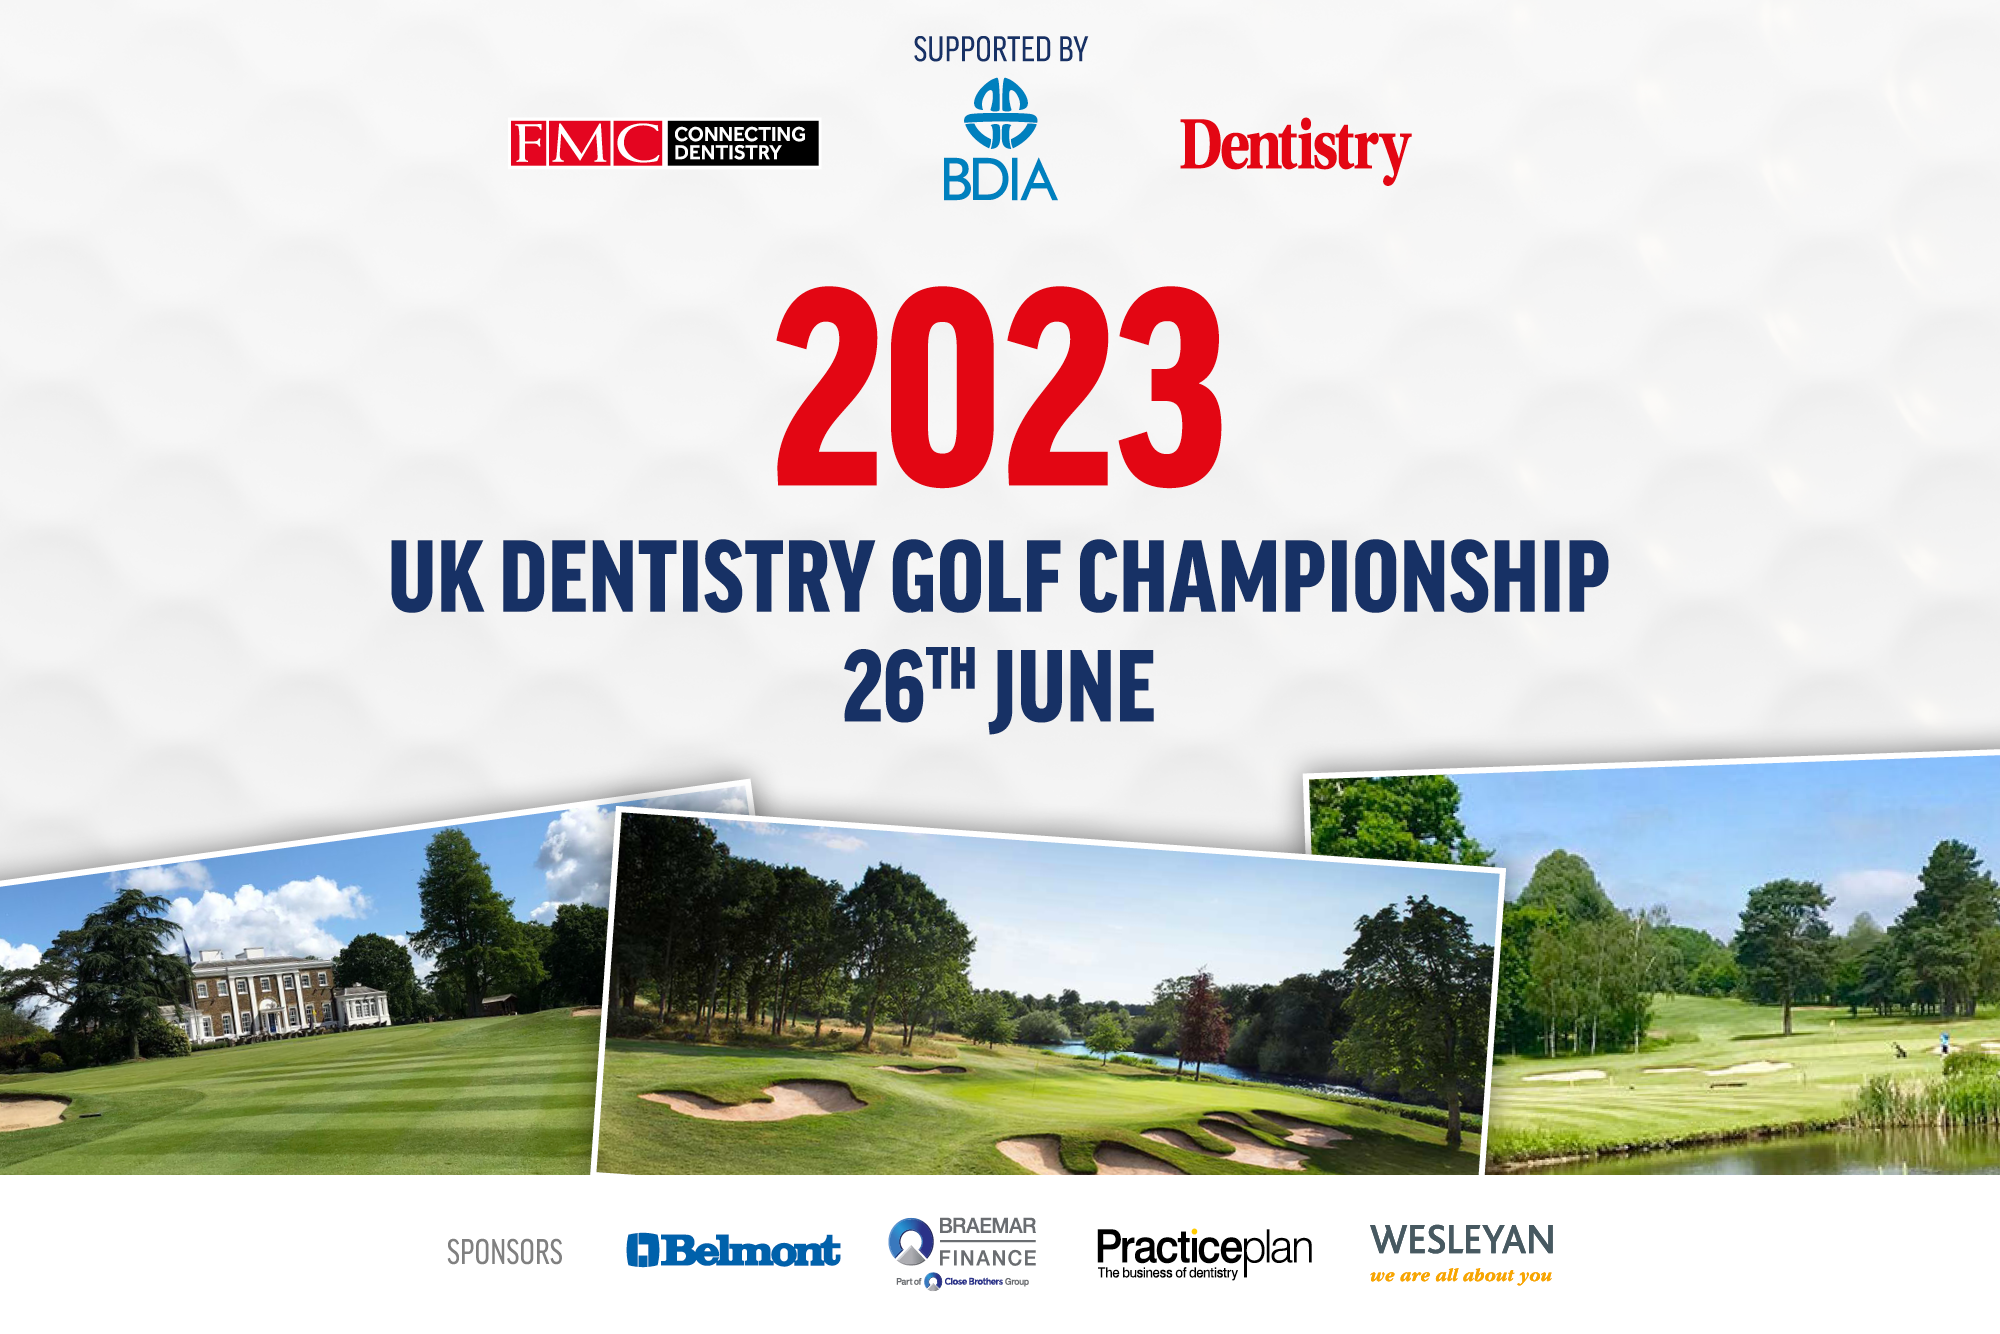 Join FMC for a day of networking and friendly competition at the UK Dentistry Golf Championship this June. Find out how to sign up here!